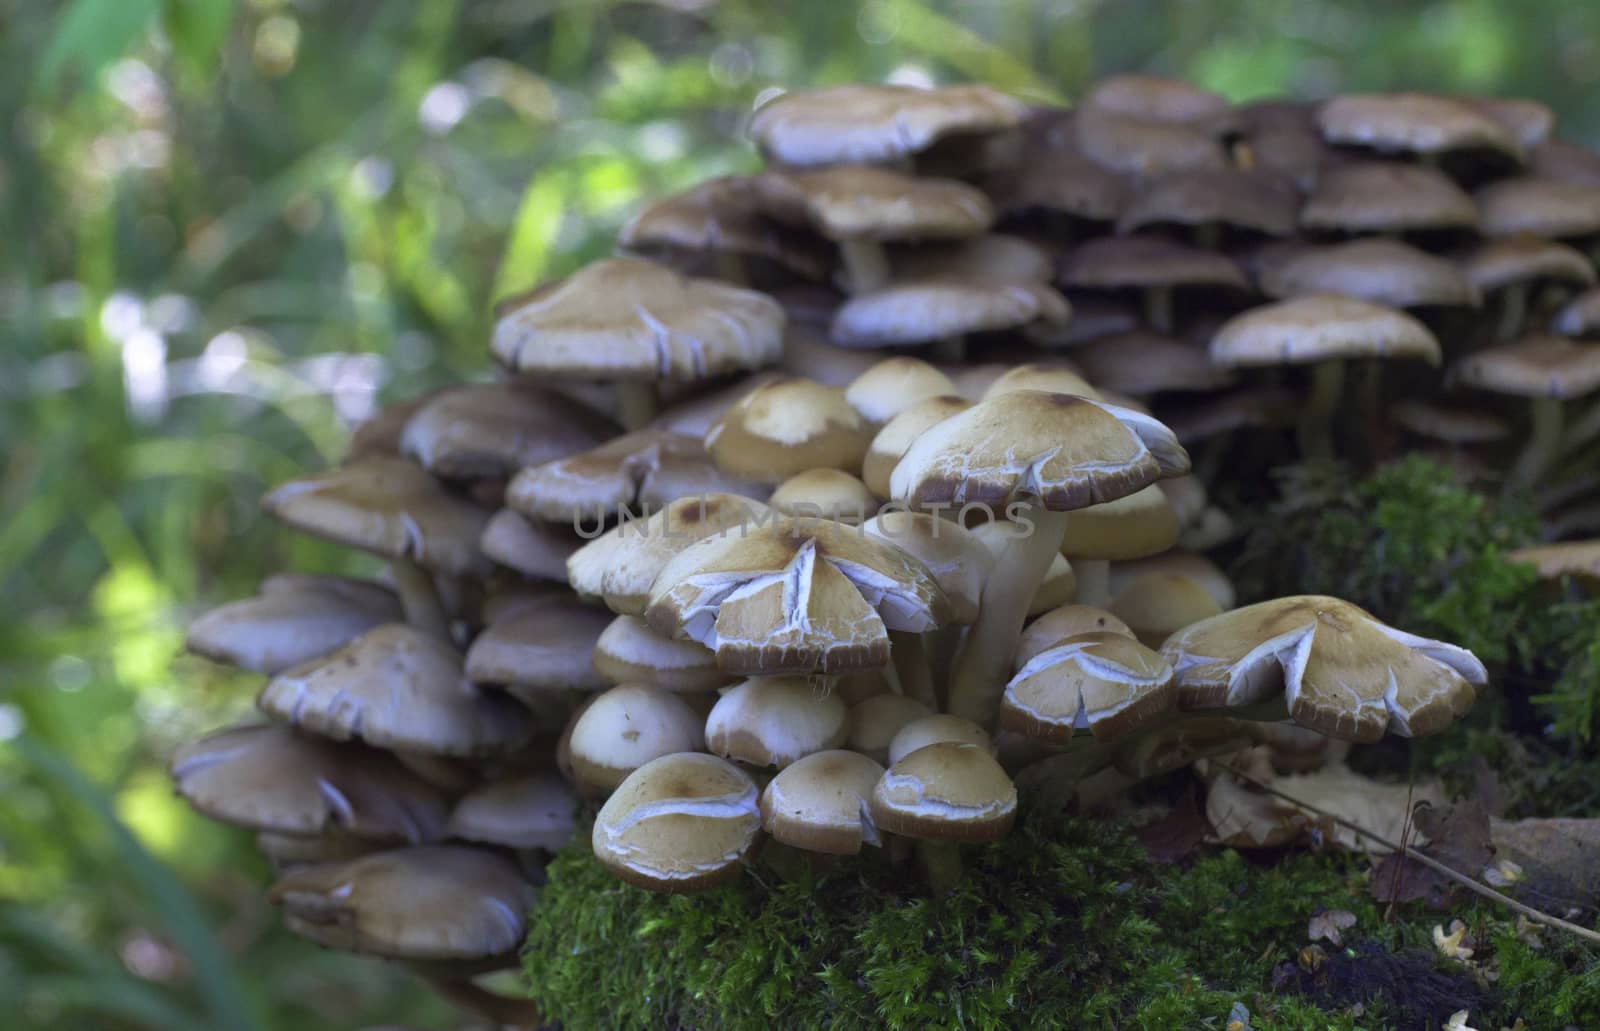 Mushrooms, growing on a tree trunk covered by moss in the autumn forest.